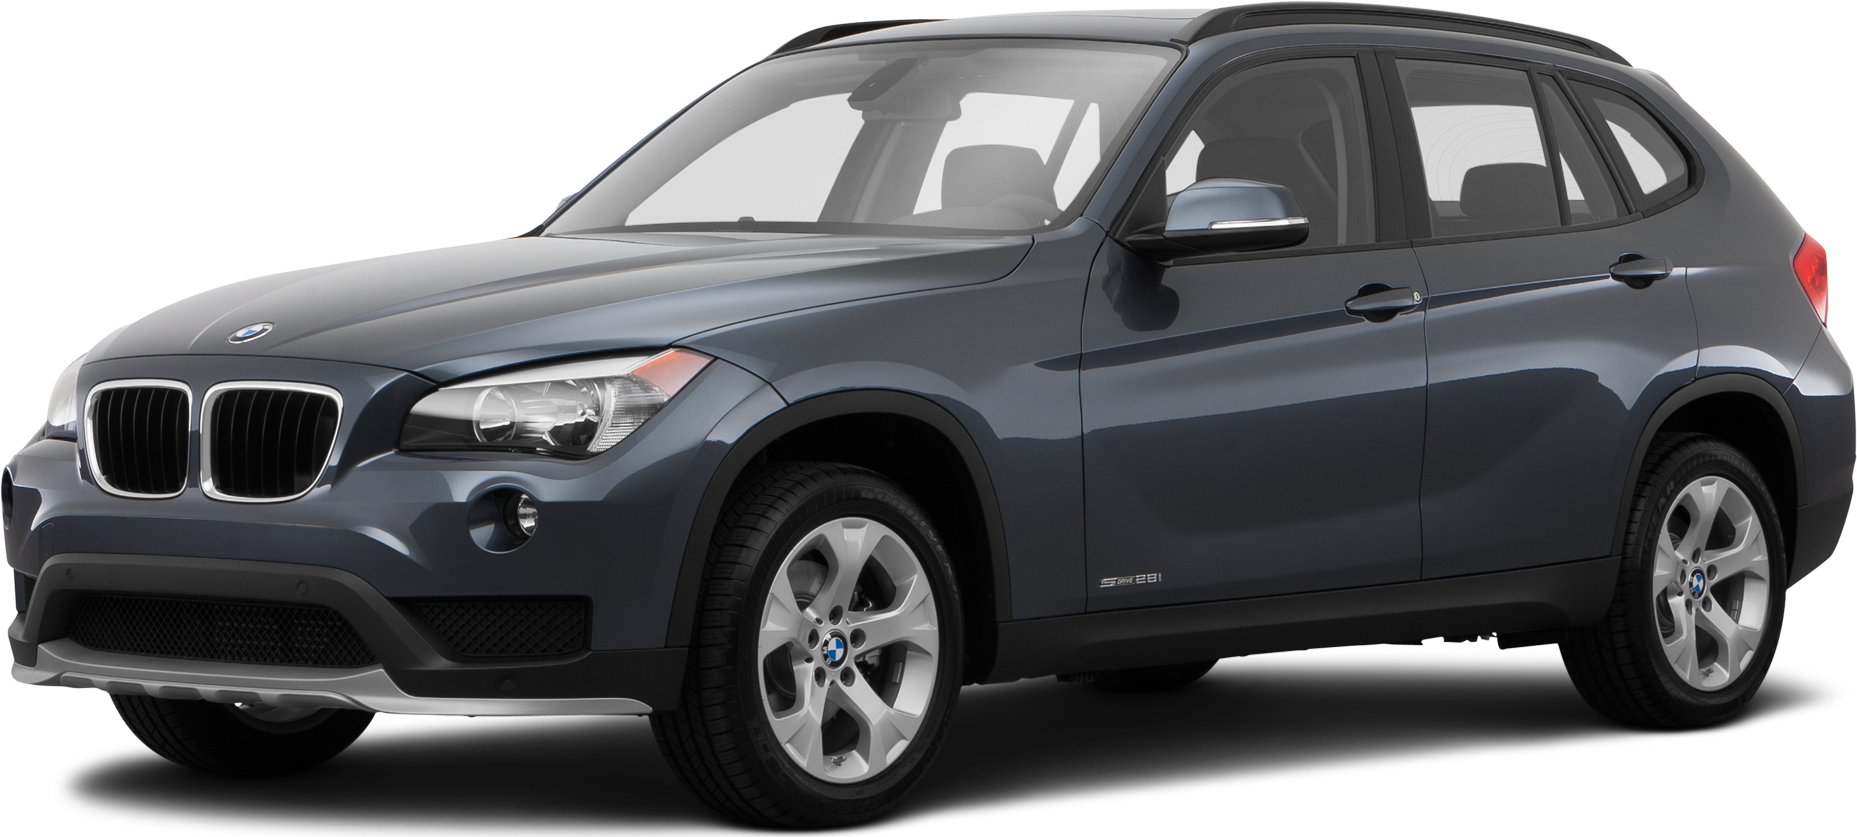 BMW X1 2015 F48 (2015 - 2019) reviews, technical data, prices